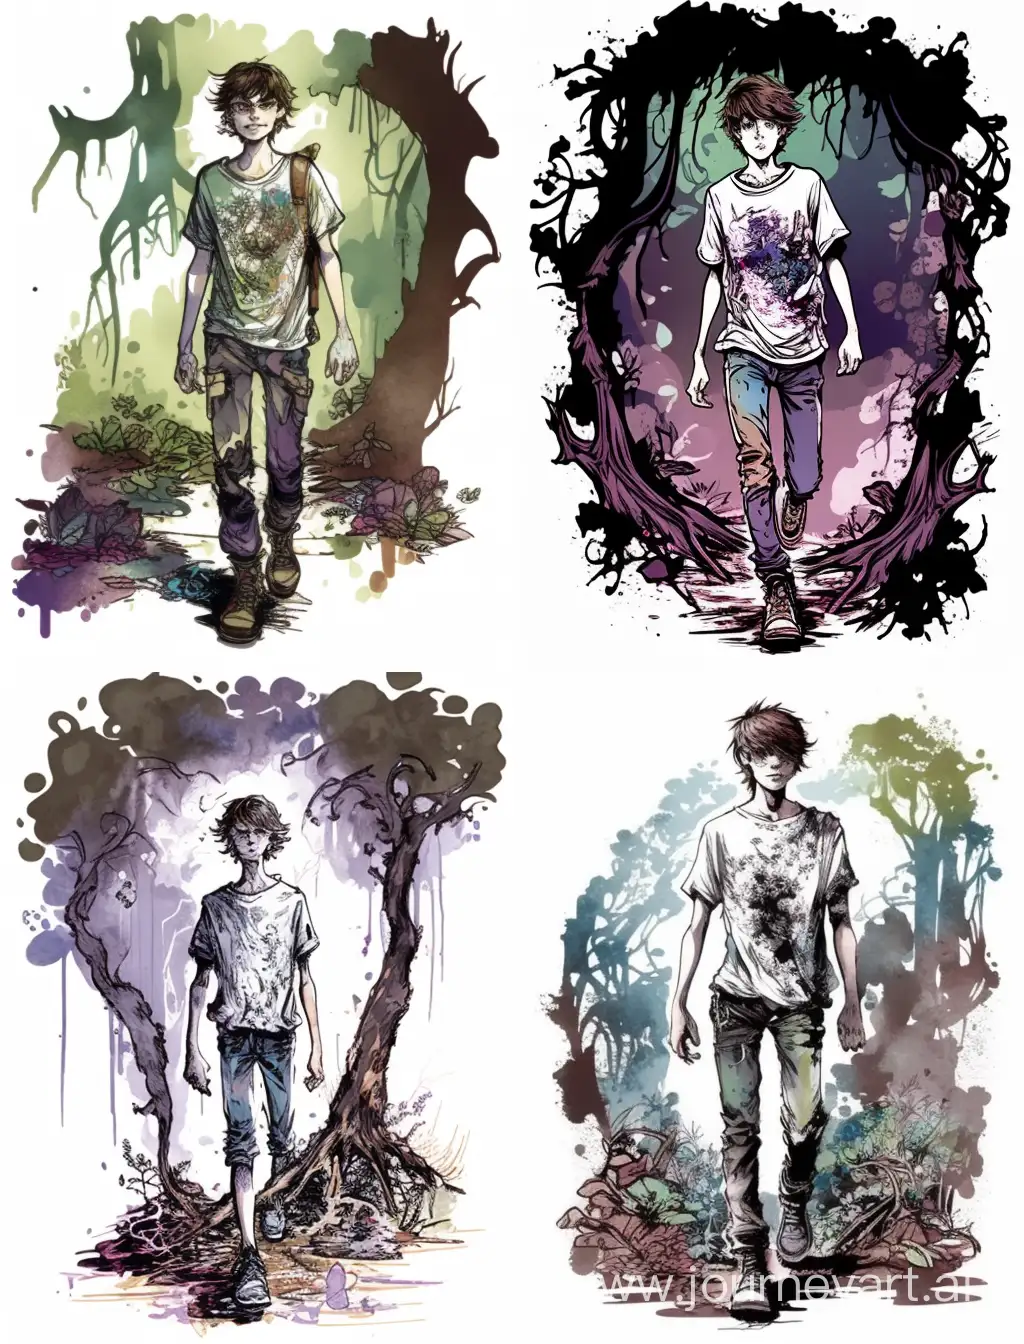  we have a teenage boy walking through a mysterious realm full of strange and wonderful creatures, magic, and wonders. The boy is very tall and thin, with messy brown hair and big expressive eyes. He is wearing a loose shirt with a loose tie-dyed t-shirt underneath, and baggy jeans. The environment he is walking through is very mystical, with a lot of glowing crystals and strange rocks surrounding him. The atmosphere is filled with a sense of adventure and mystery.